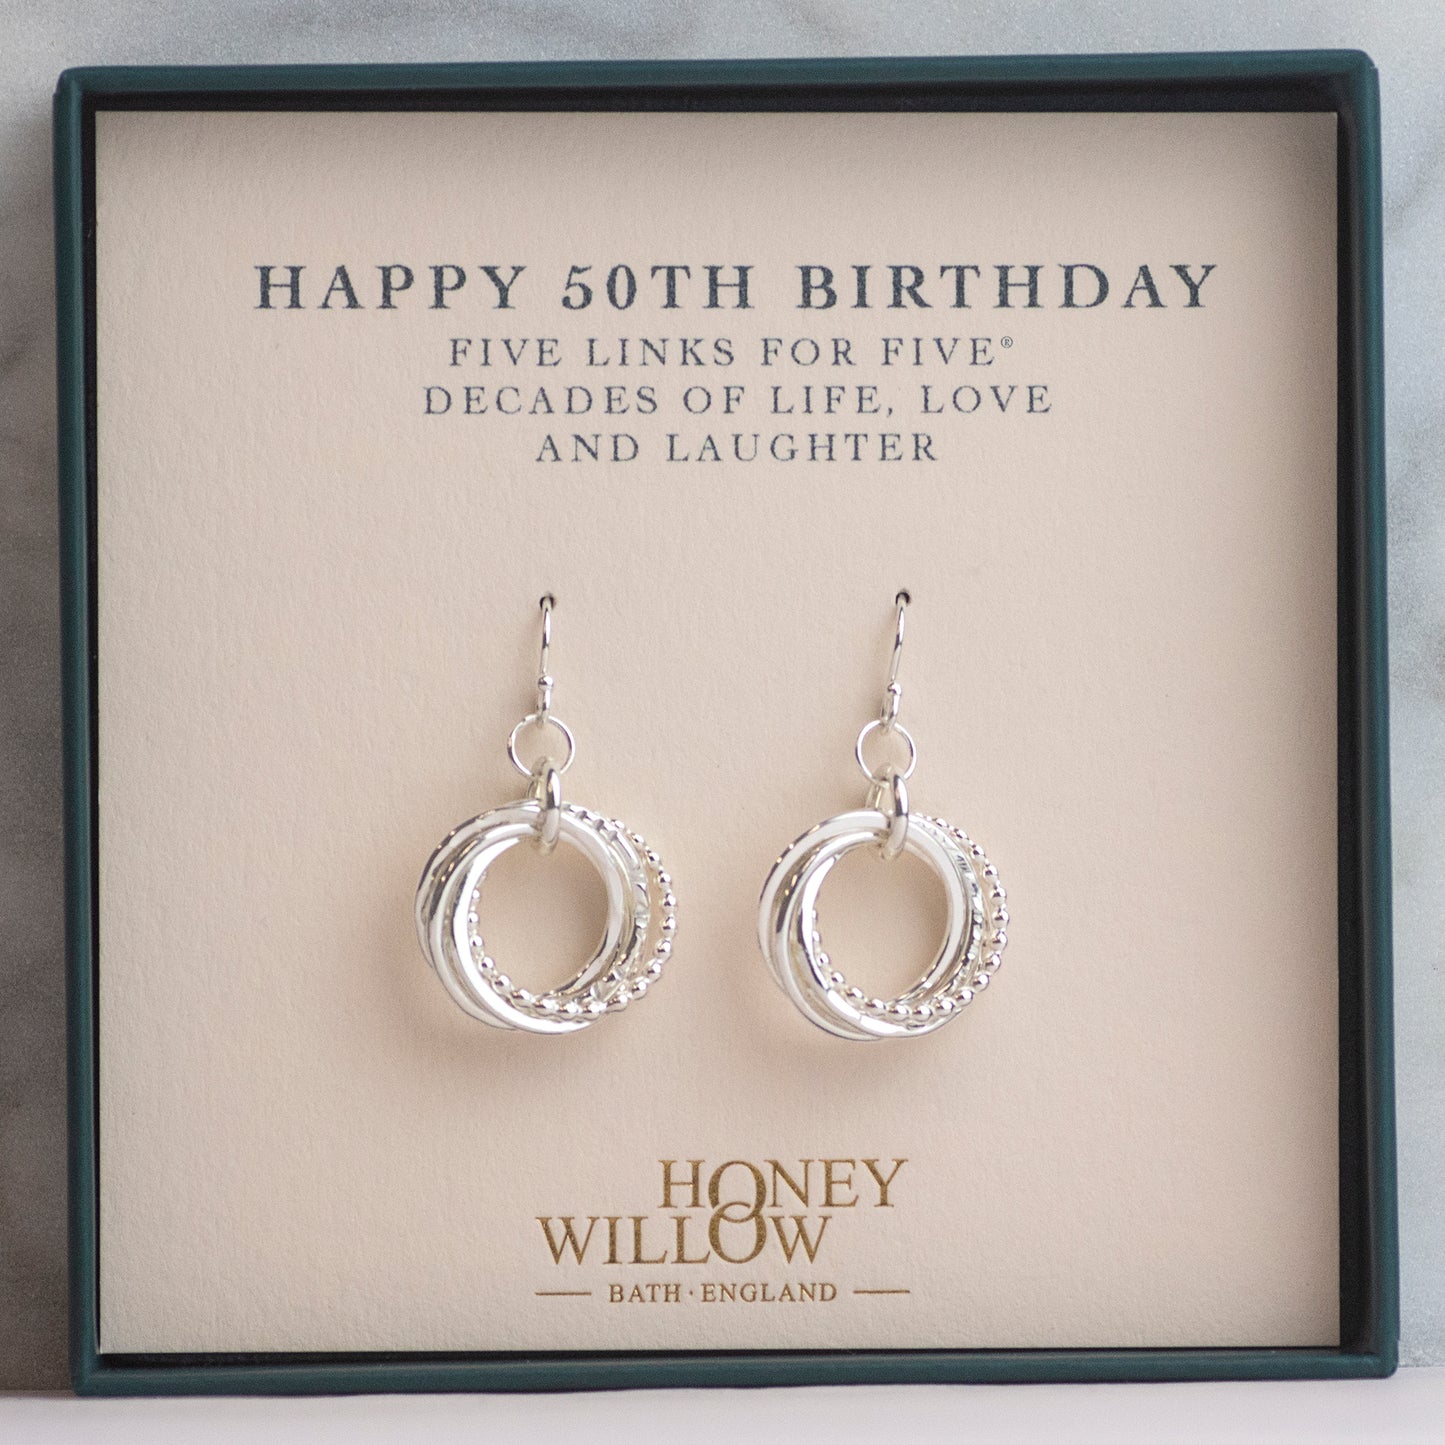 50th Birthday Earrings - 5 Links for 5 Decades Earrings - Silver